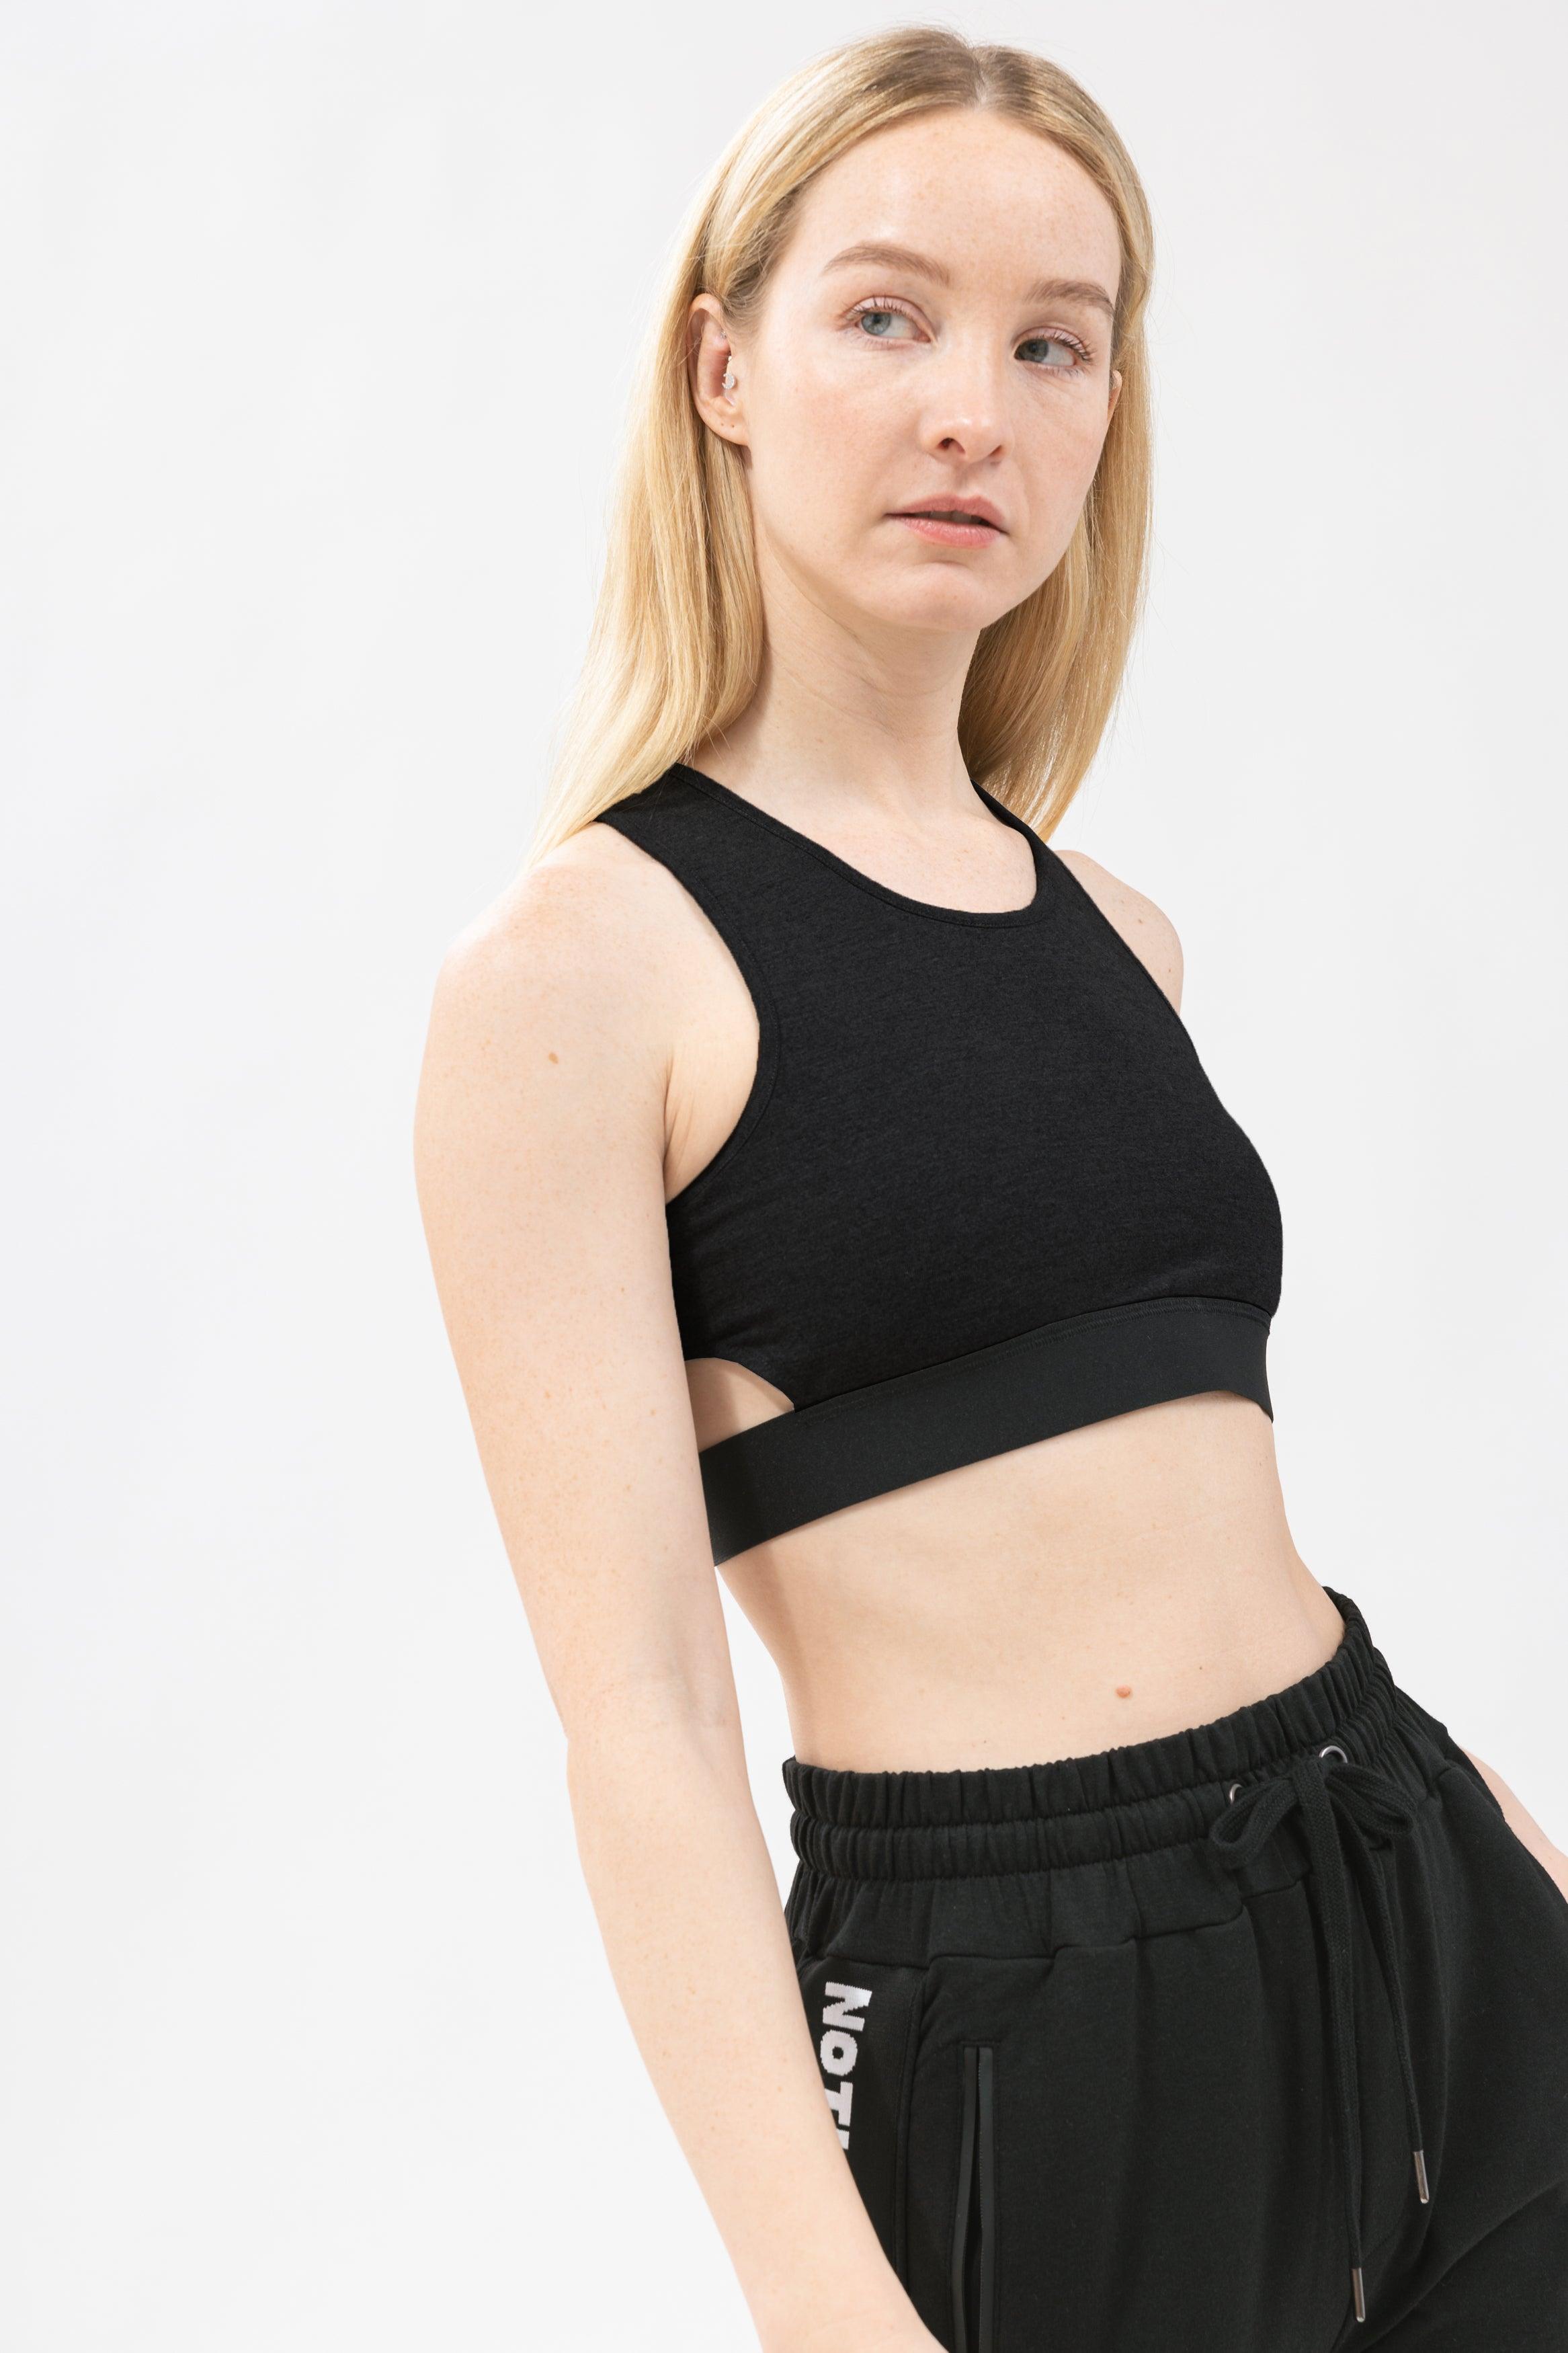 Bralette Tank Top - NOT LABELED